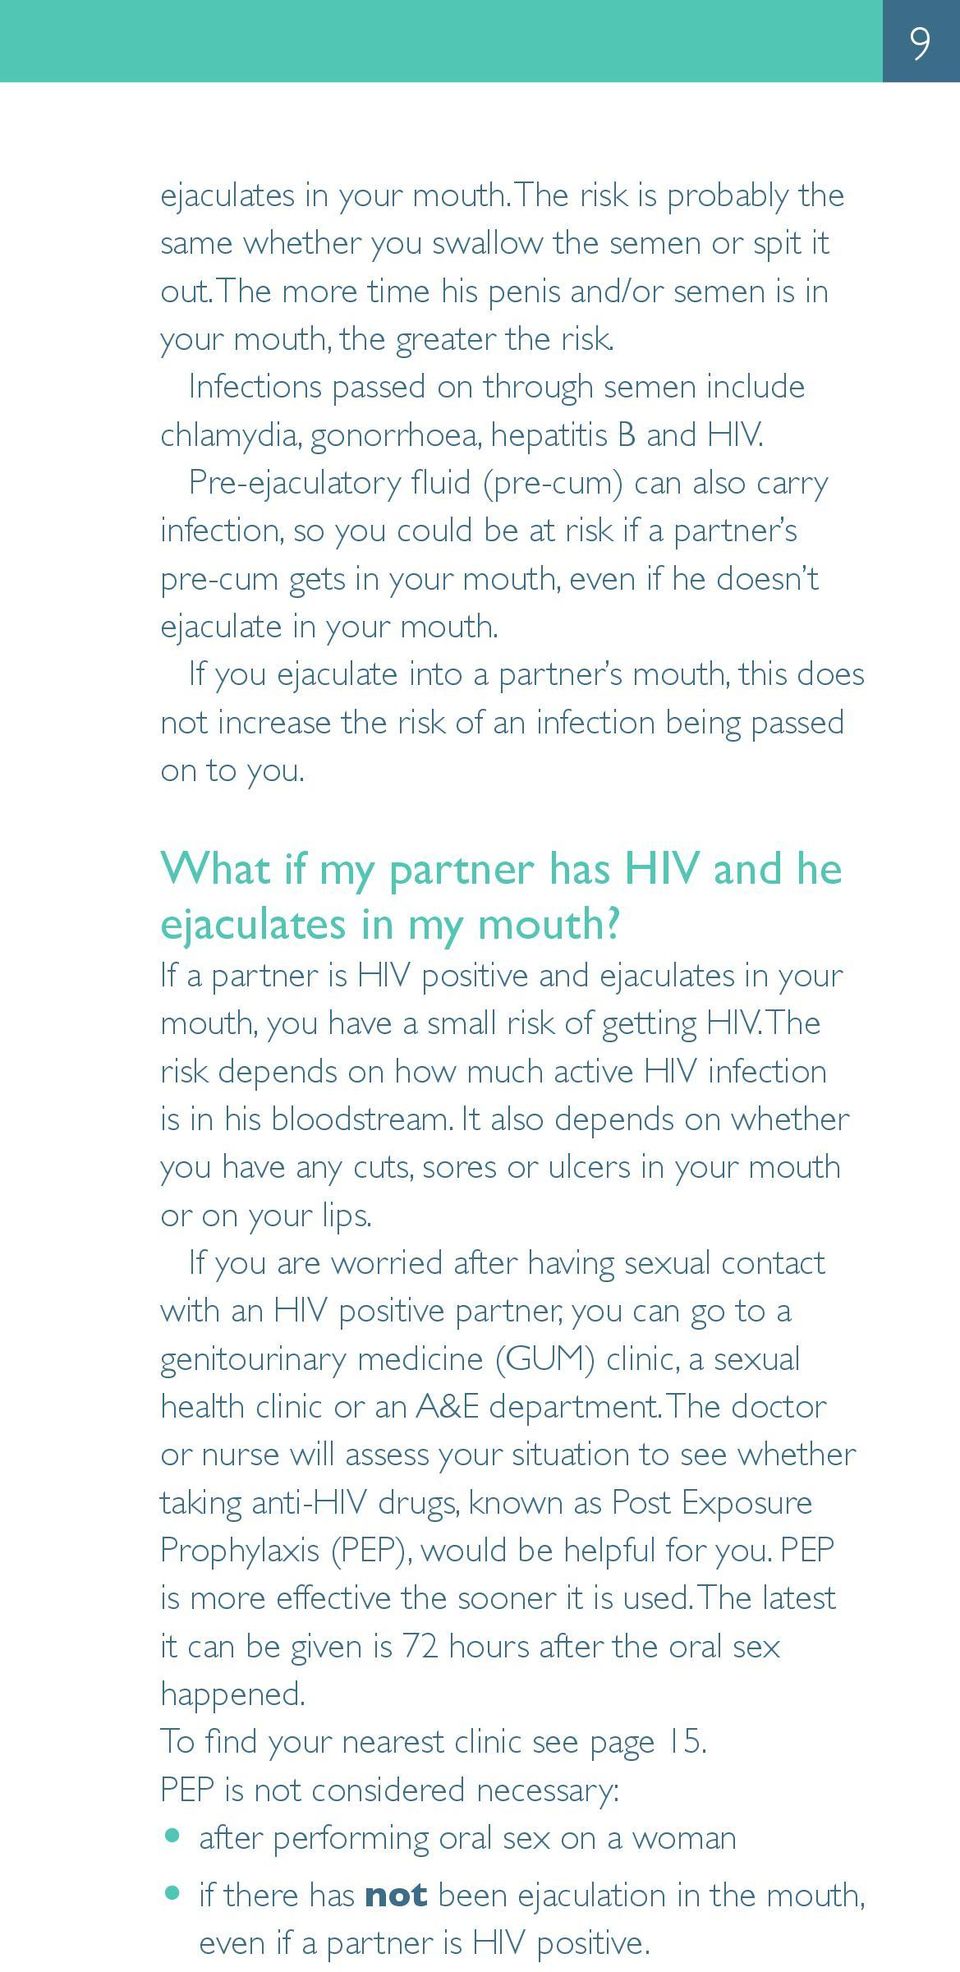 Pre-ejaculatory fluid (pre-cum) can also carry infection, so you could be at risk if a partner s pre-cum gets in your mouth, even if he doesn t ejaculate in your mouth.